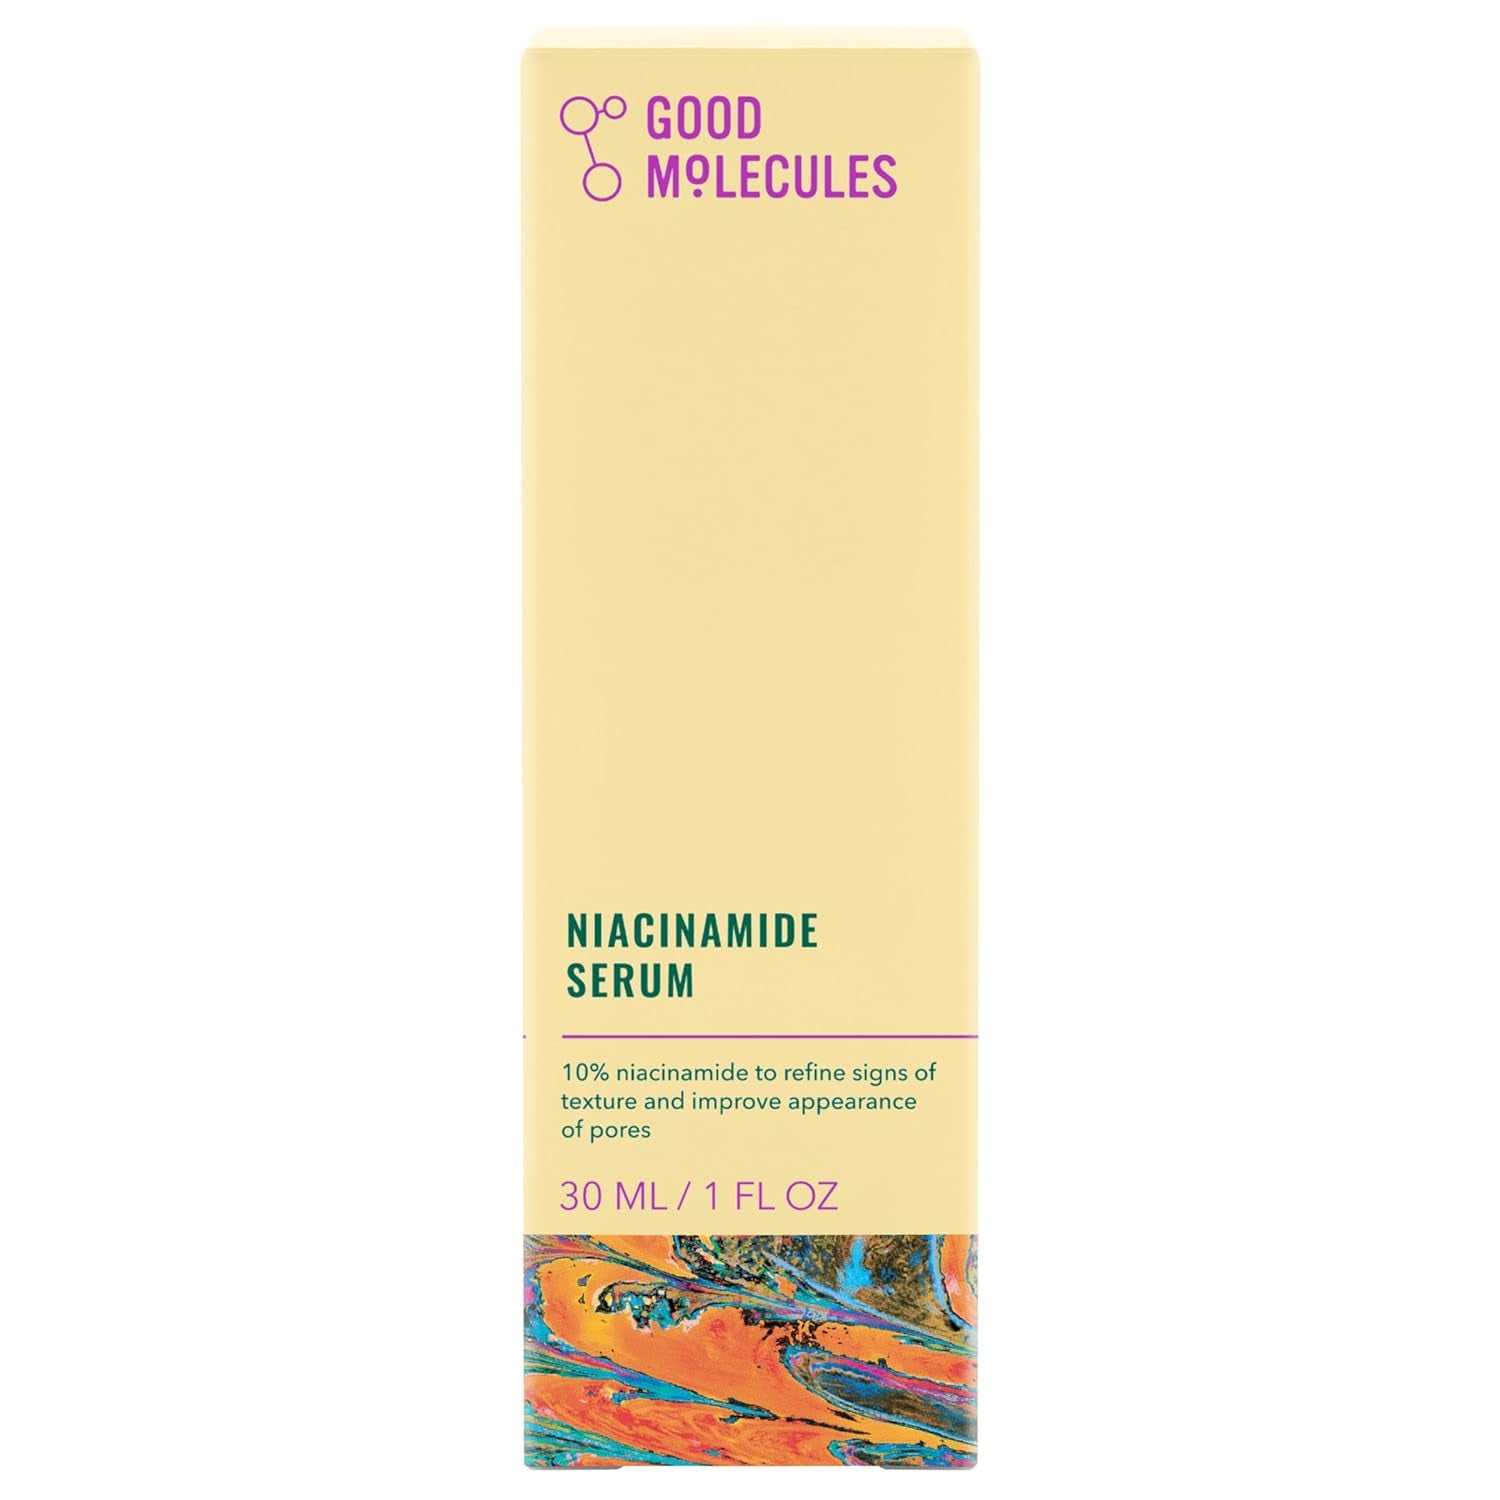 Good Molecules Niacinamide Serum - 10% Niacinamide Balancing B3 Facial Serum for Acne, Tone, Texture - Brightening and Hydrating Skincare for Face